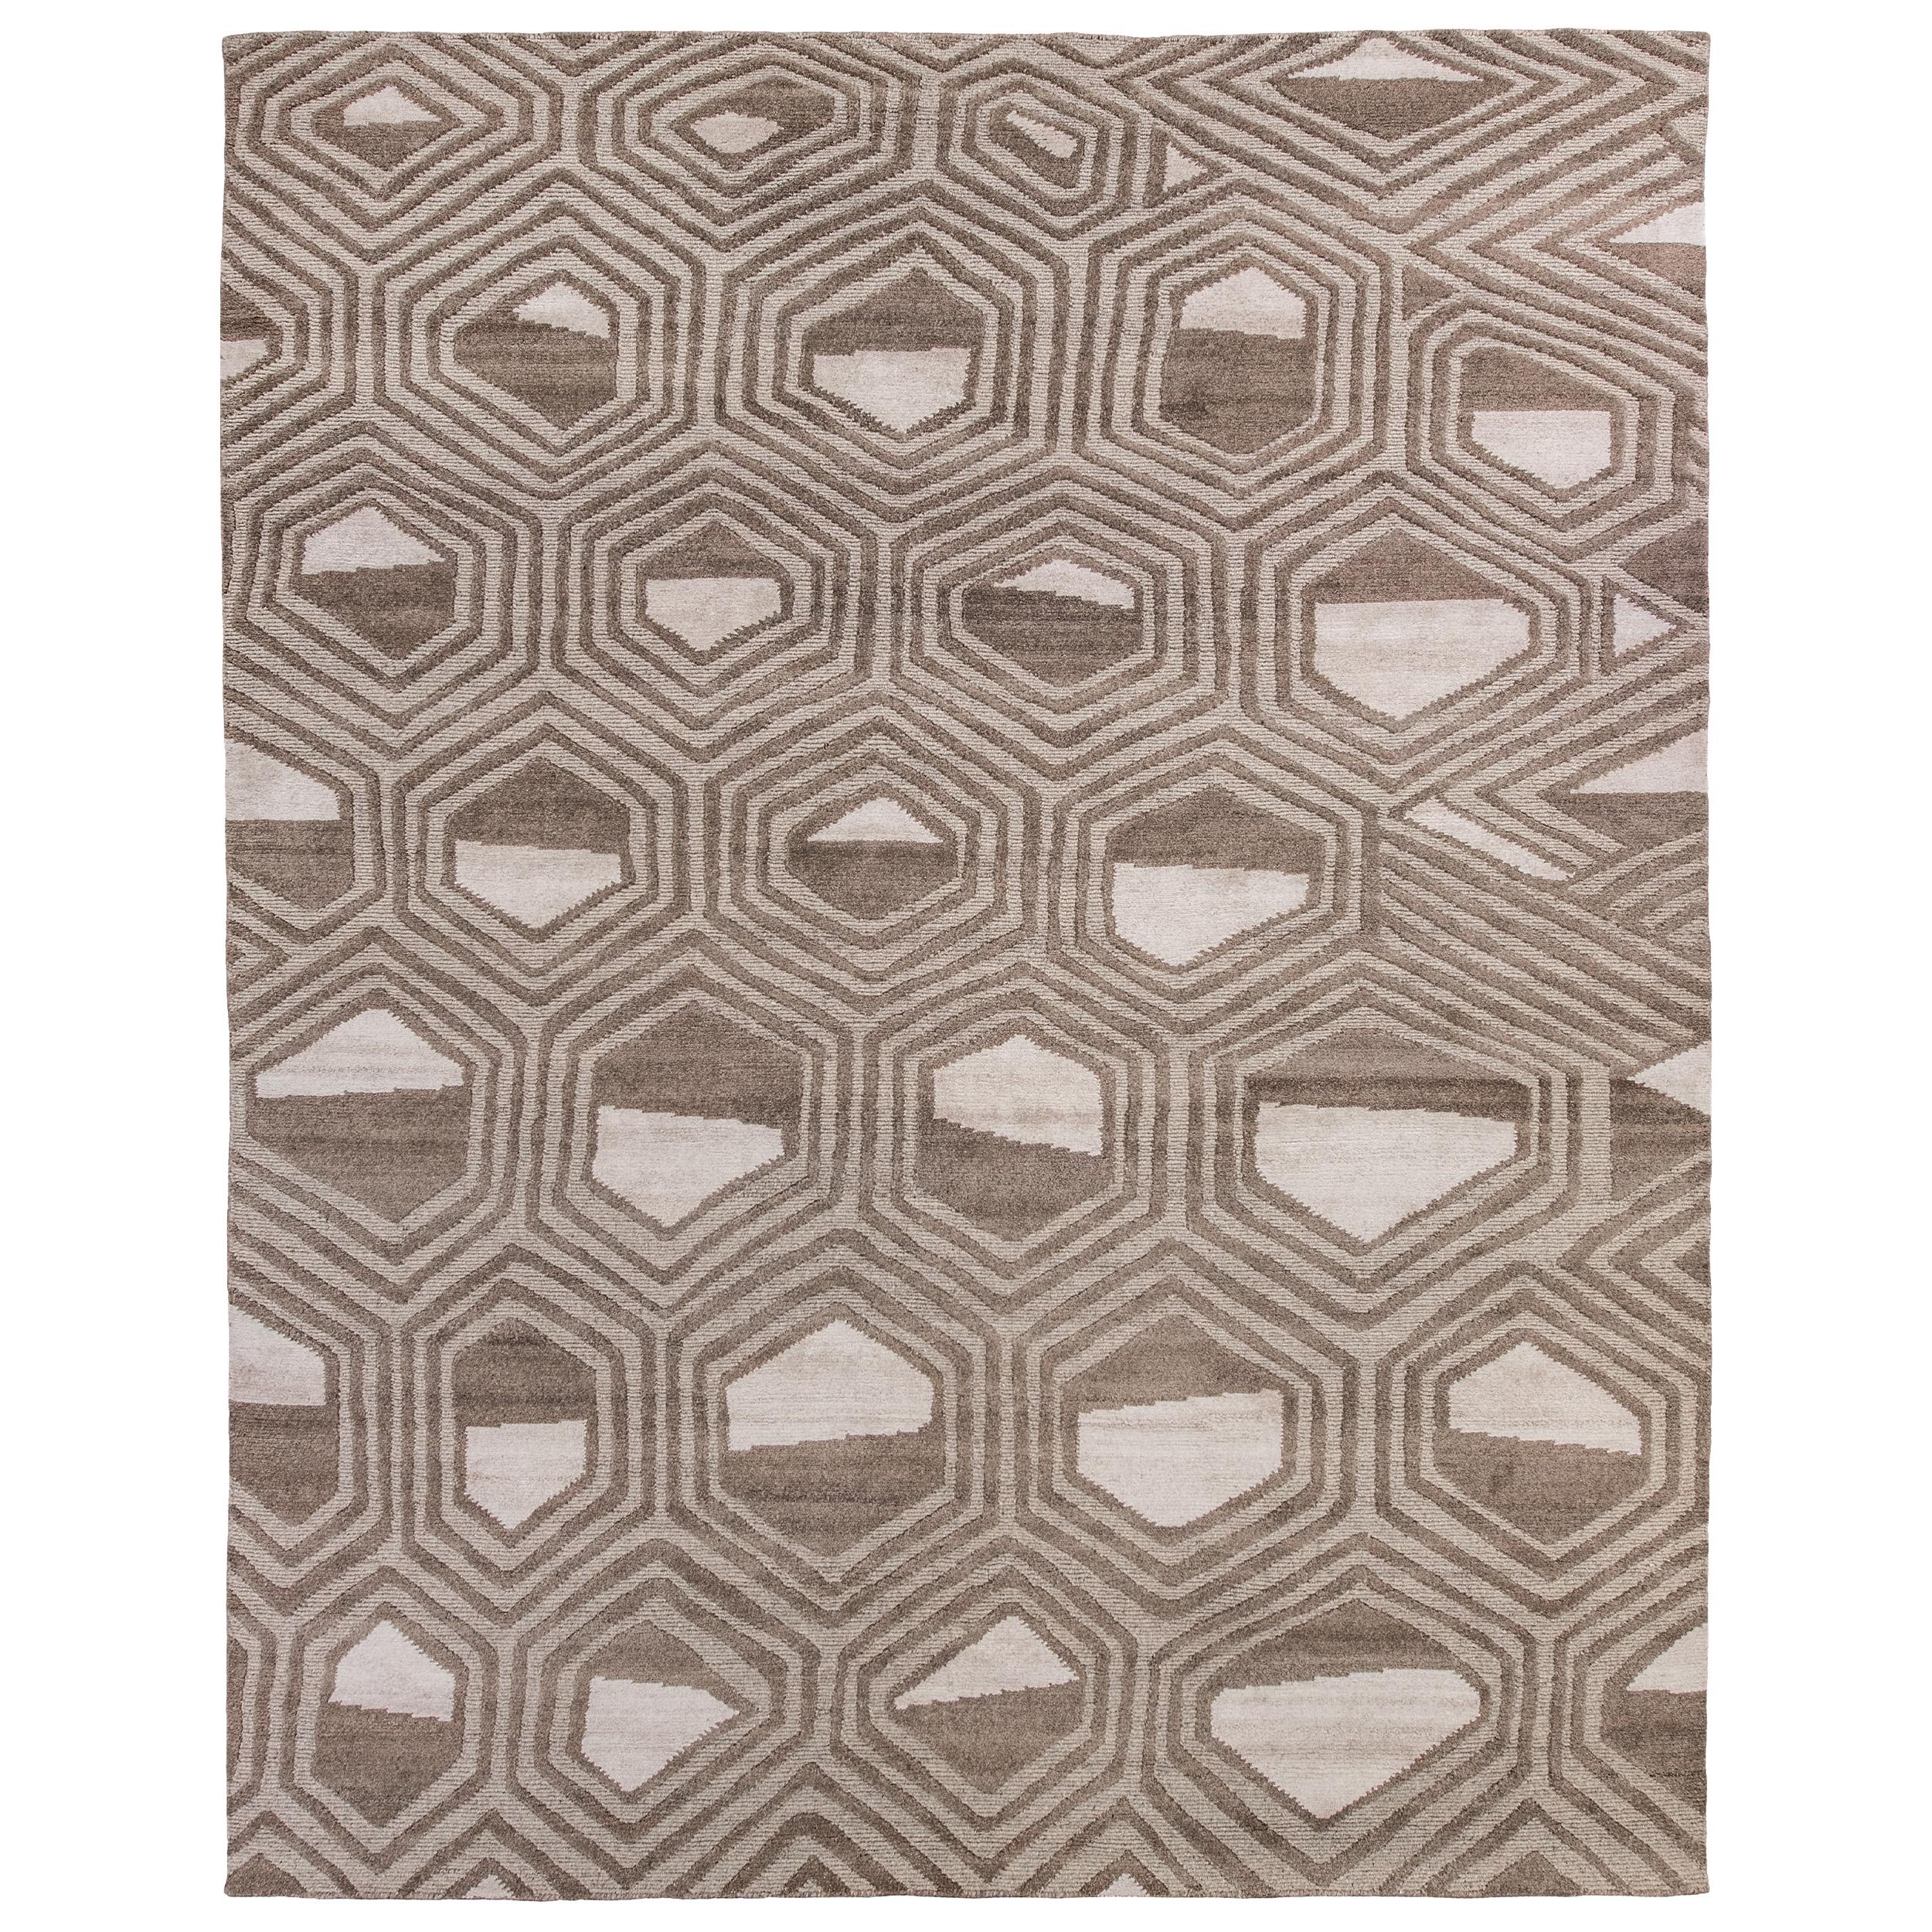 Luxurious hand-knotted rug meticulously crafted into a masterpiece, made of the perfect blend of wool and viscose. This rug transcend their utilitarian purpose, becoming works of art that delight the senses and seamlessly harmonize with a variety of